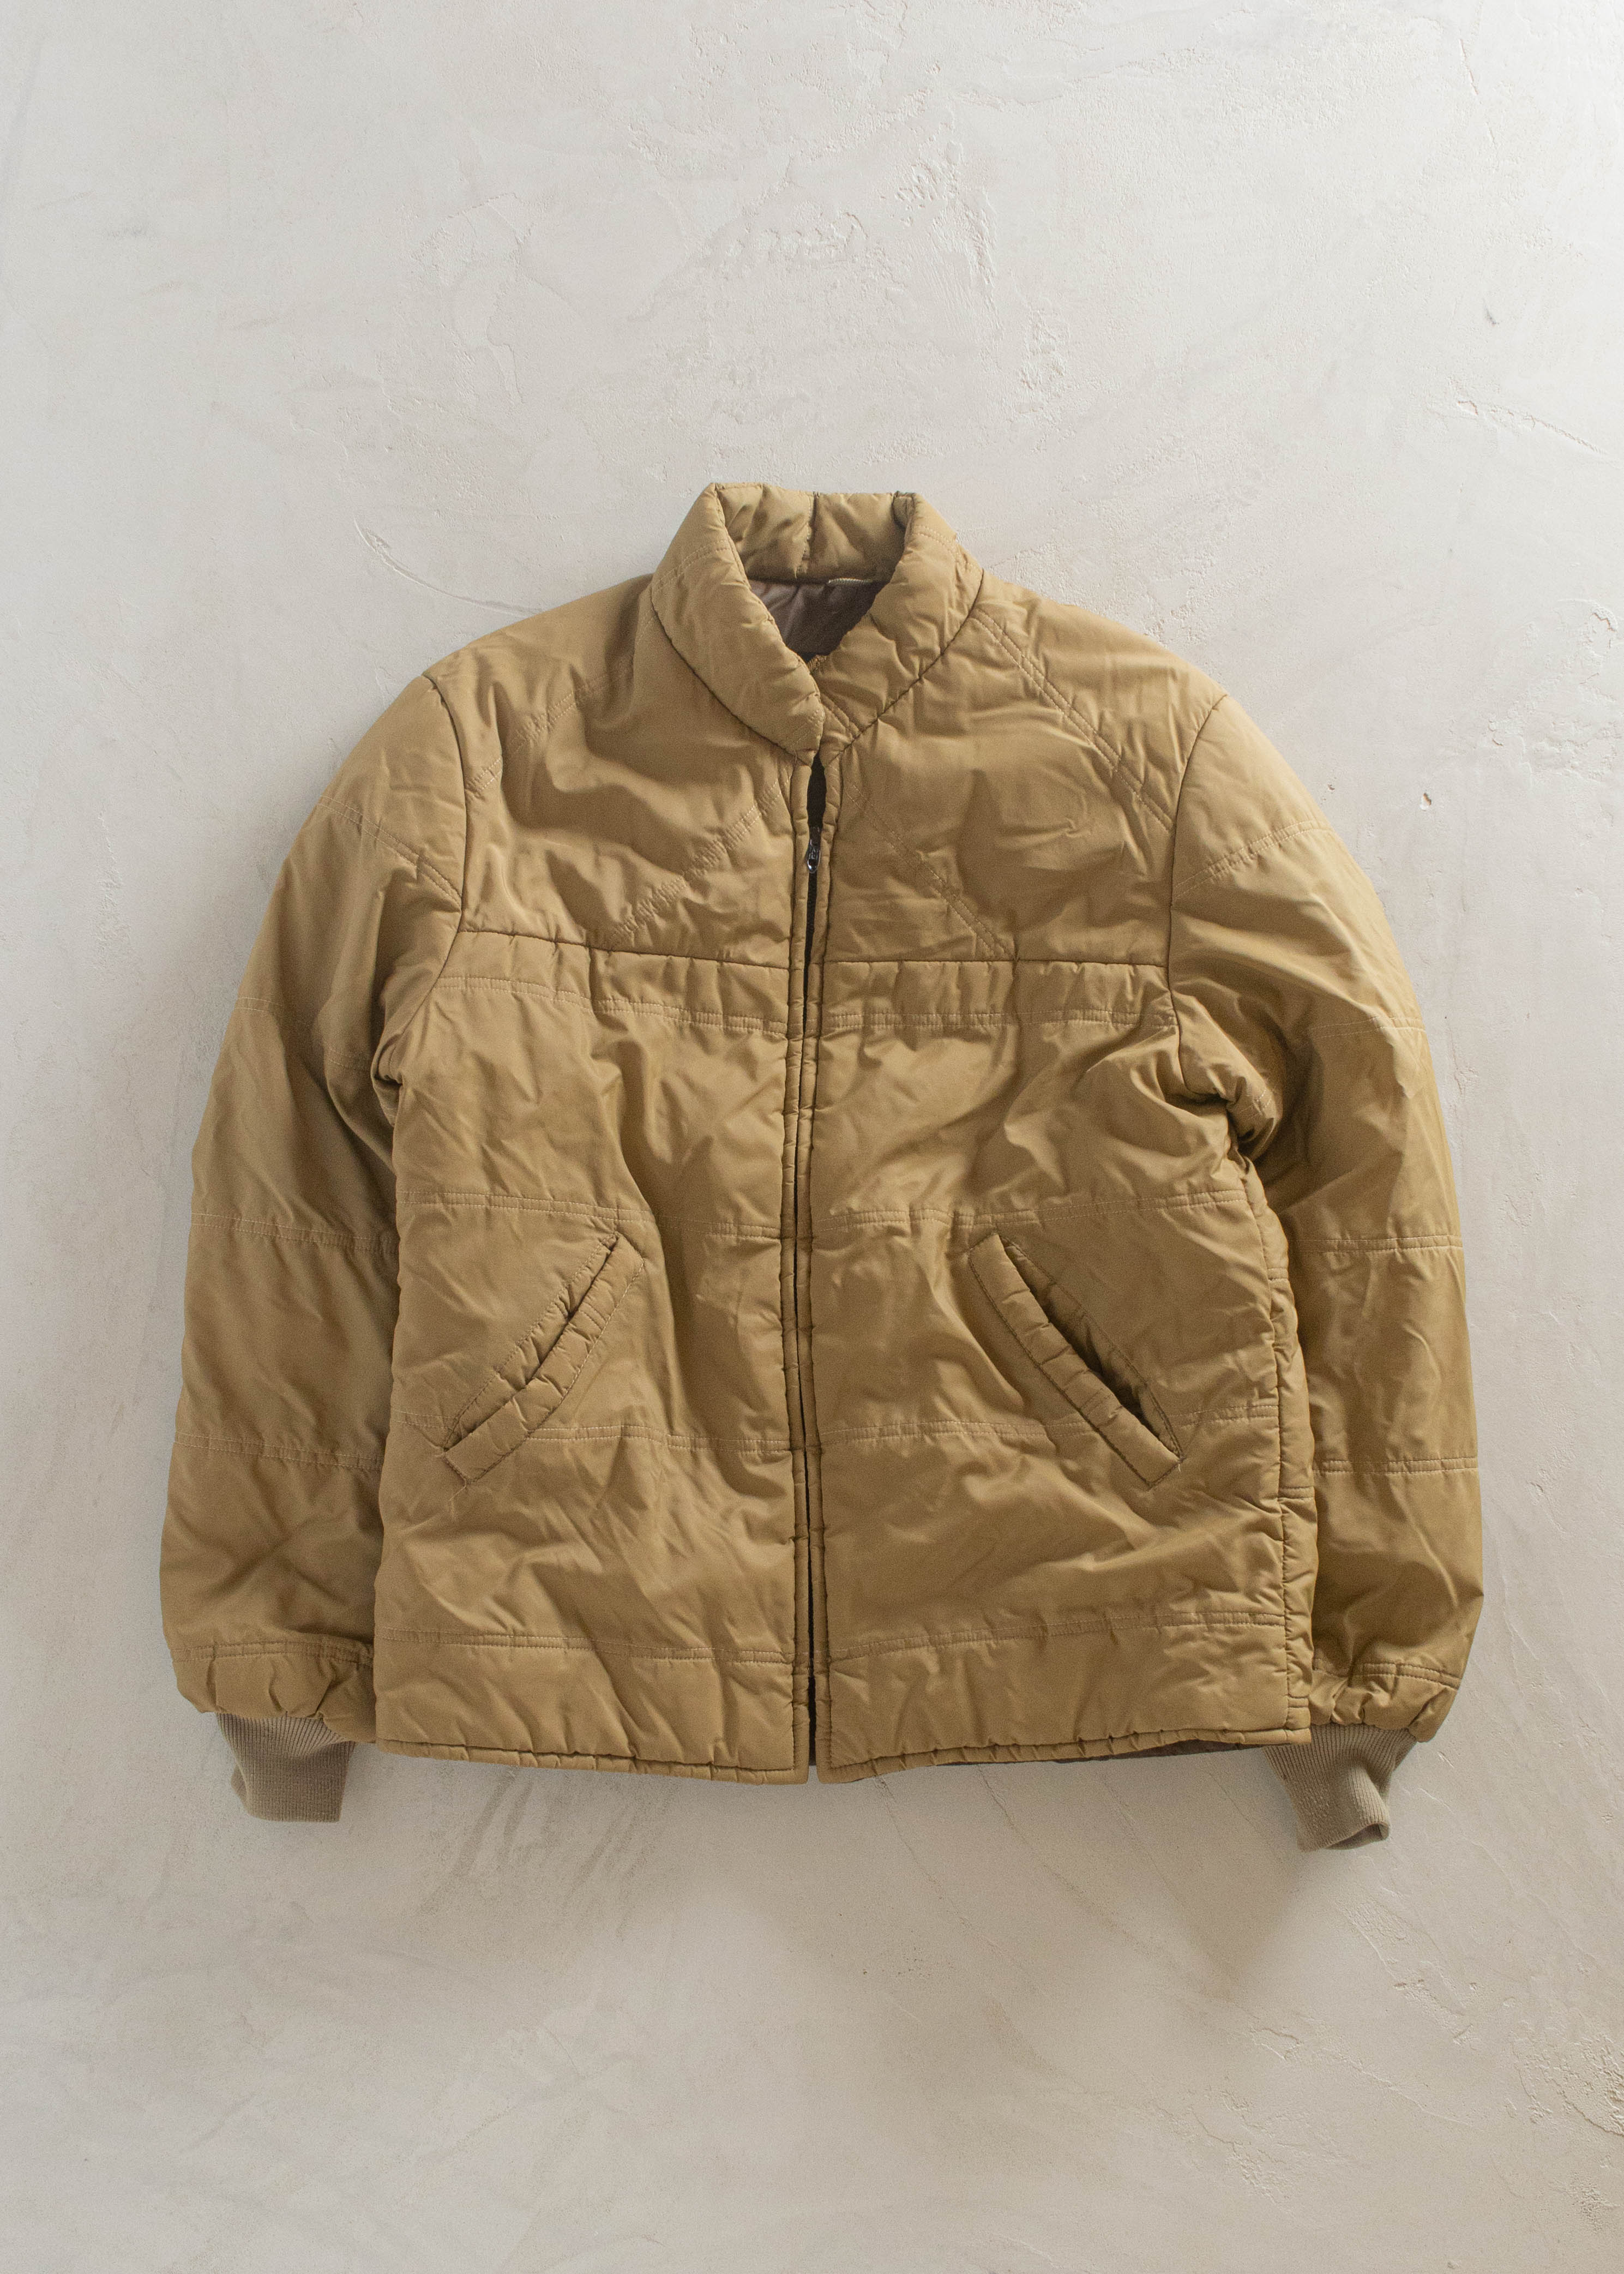 1980s Sears Puffer Jacket Size S/M – Palmo Goods